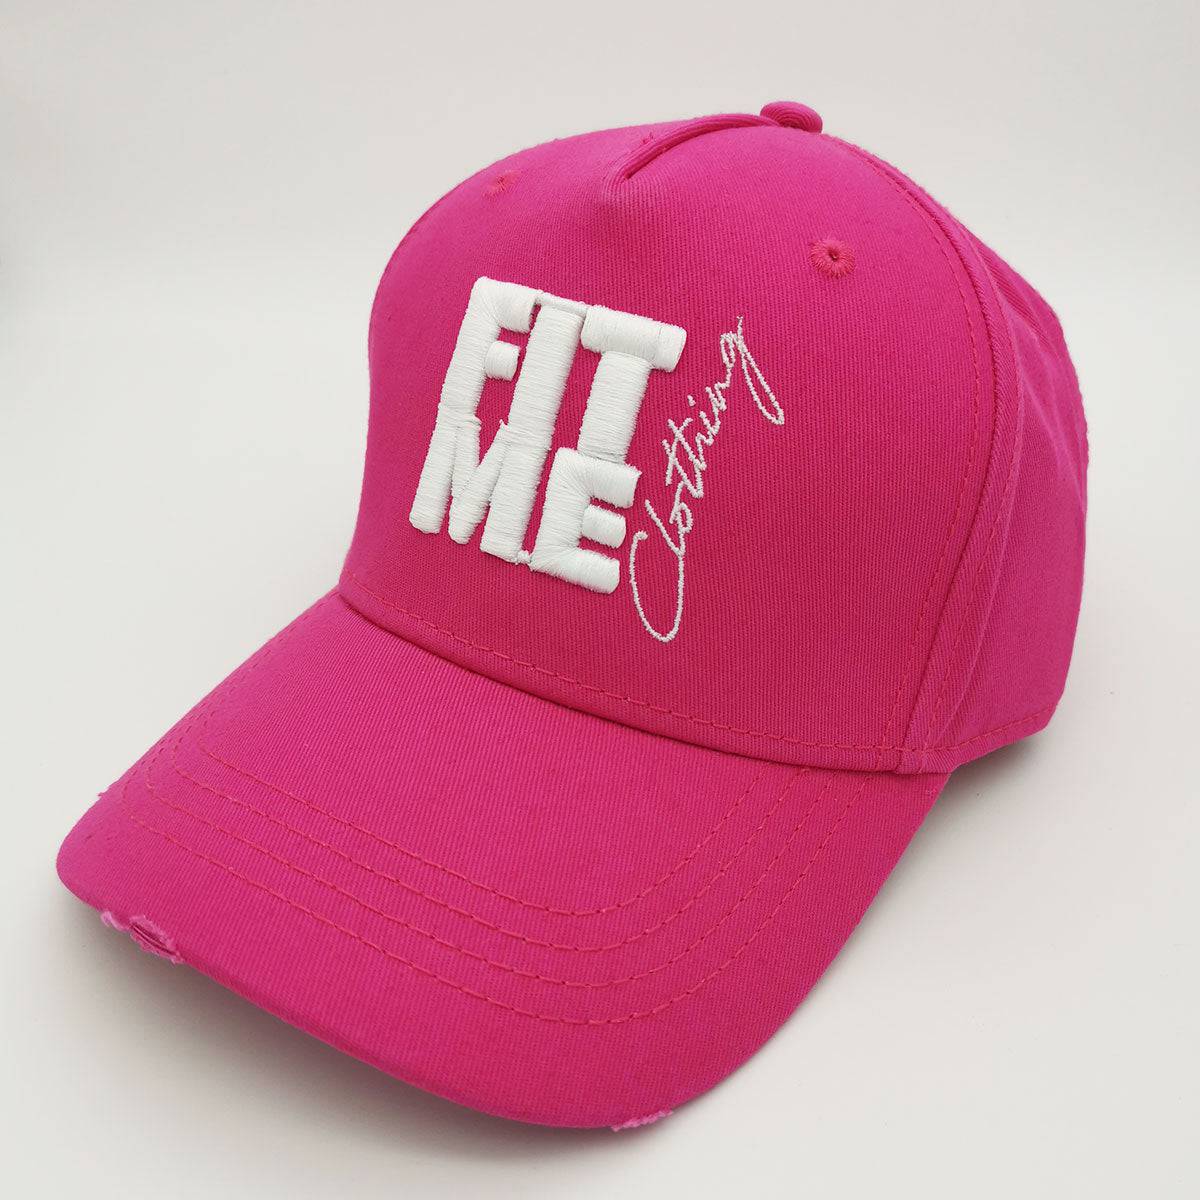 Hot Pink Distressed Logo Cap - FitMe Clothing